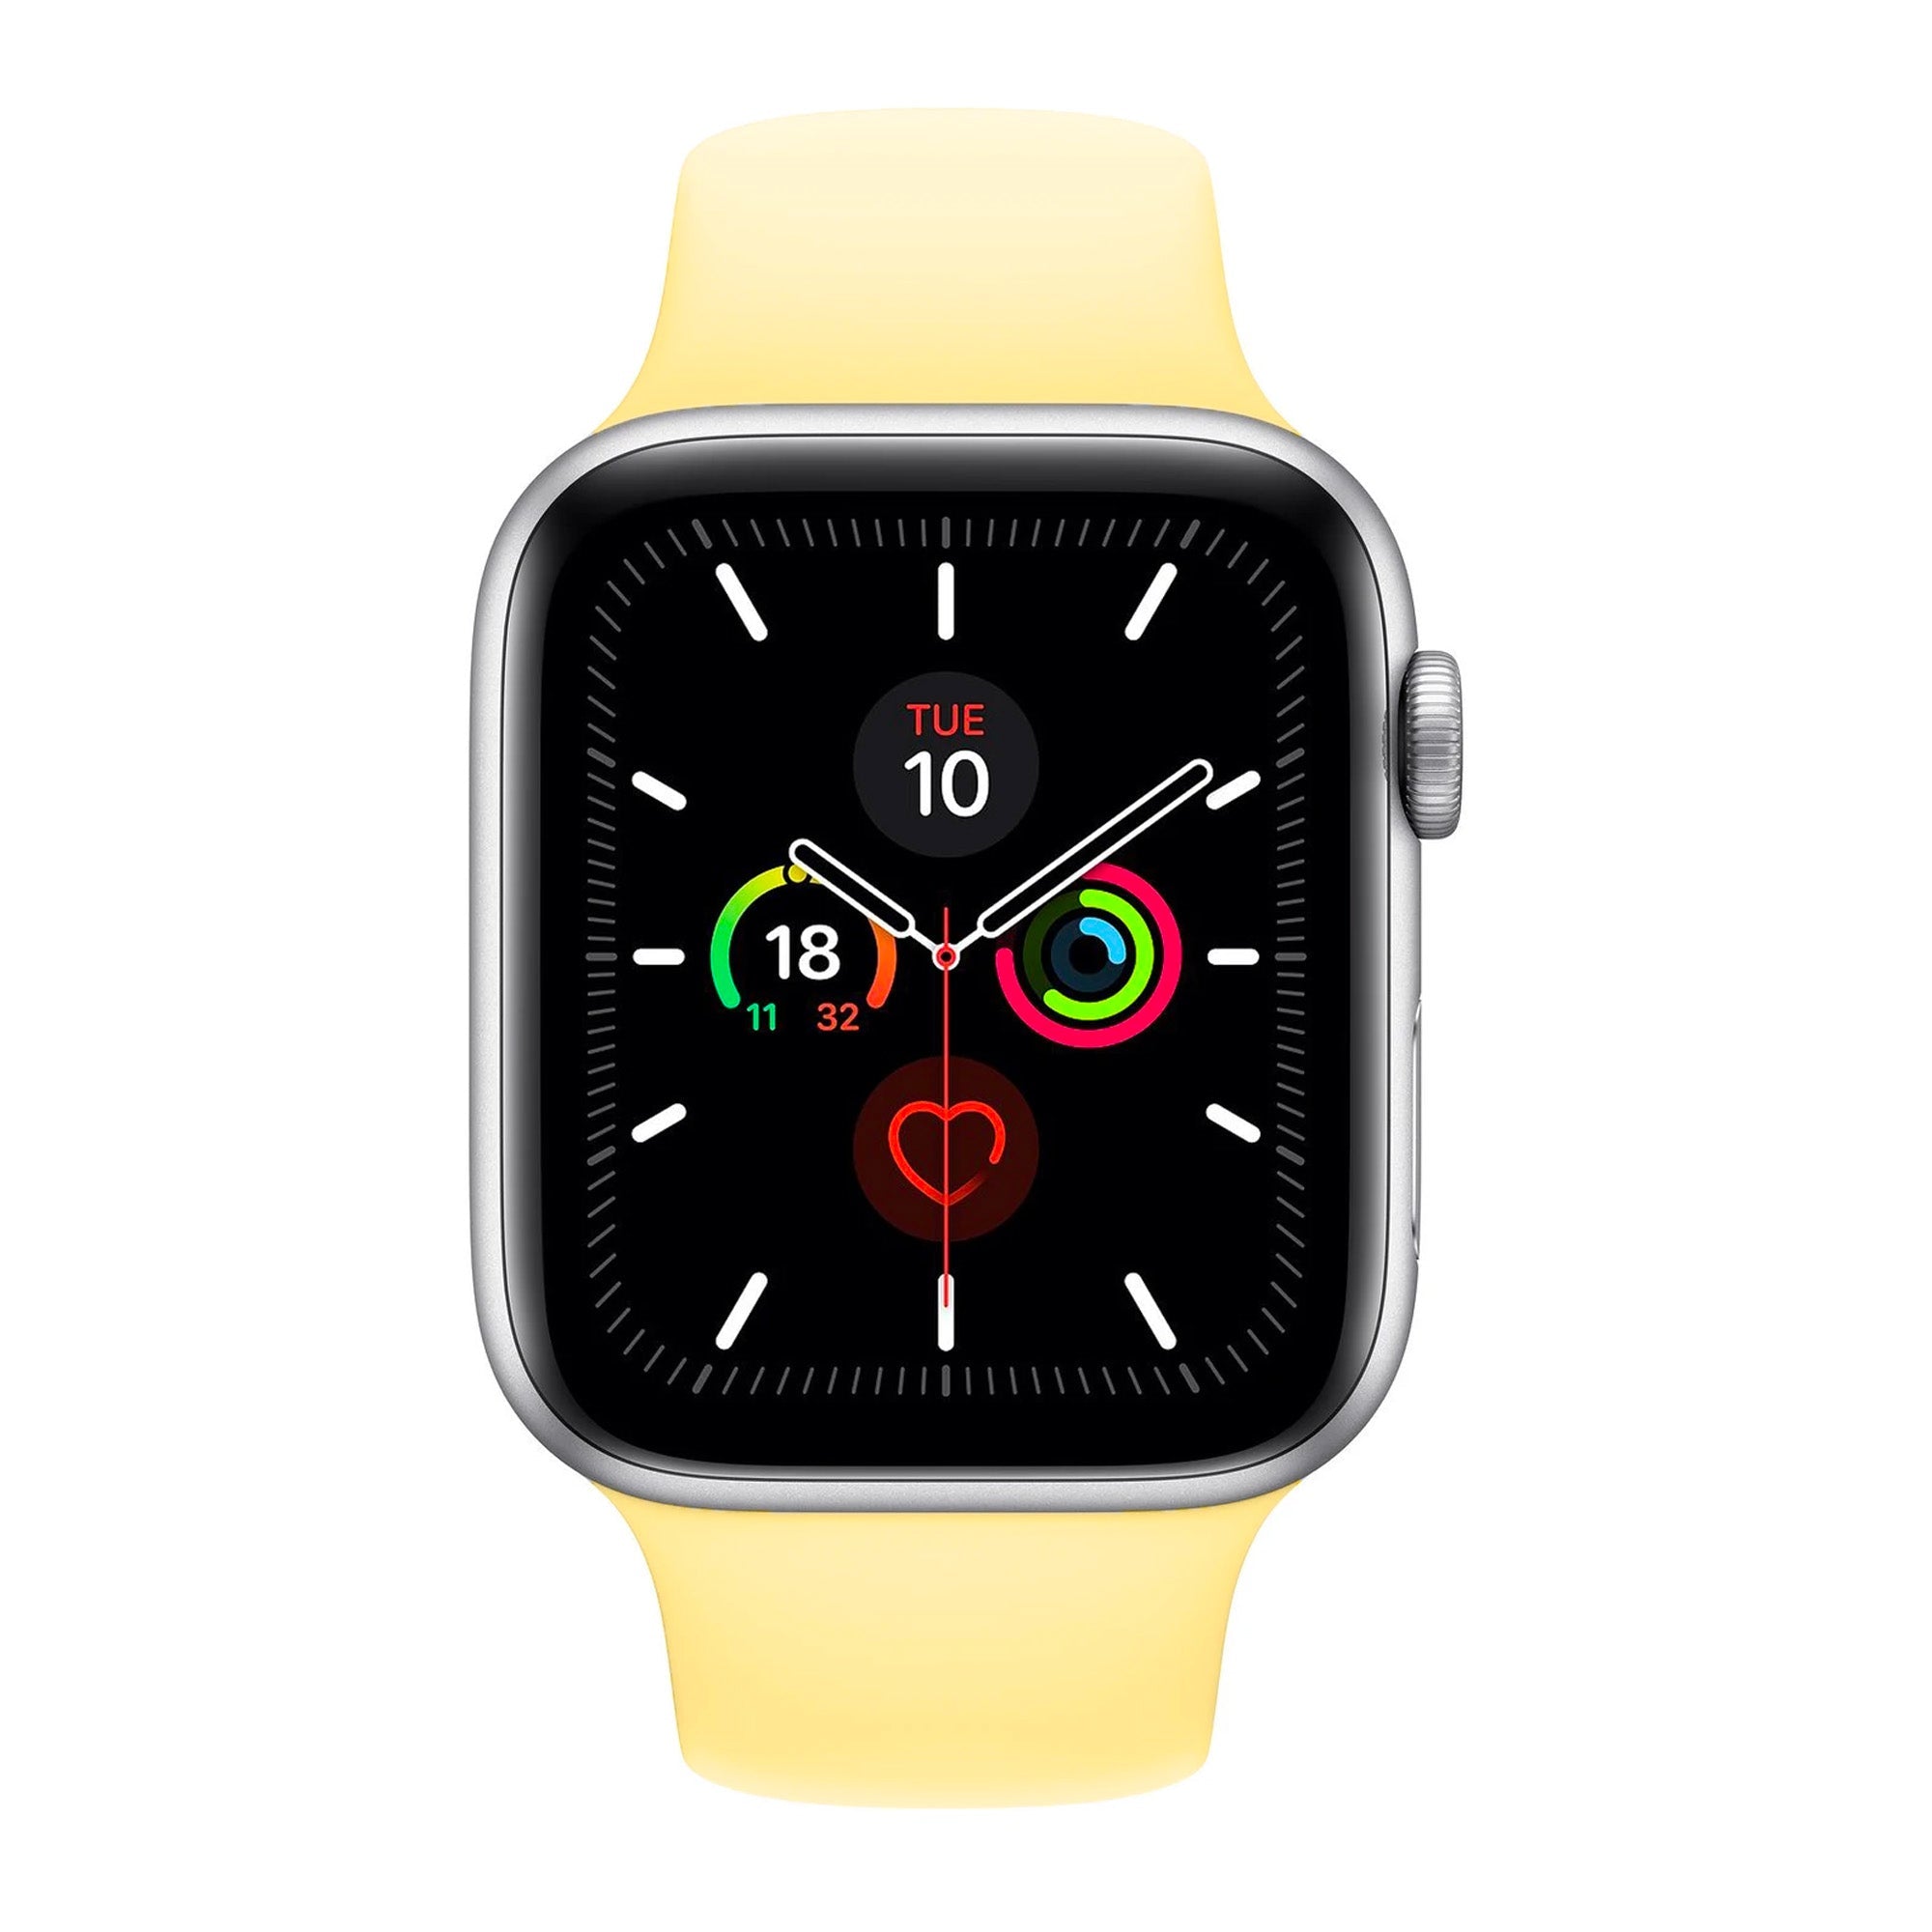 Lemon Cream Silicone Band for Apple Watch Silicone Bands   Accessories Gifts UK